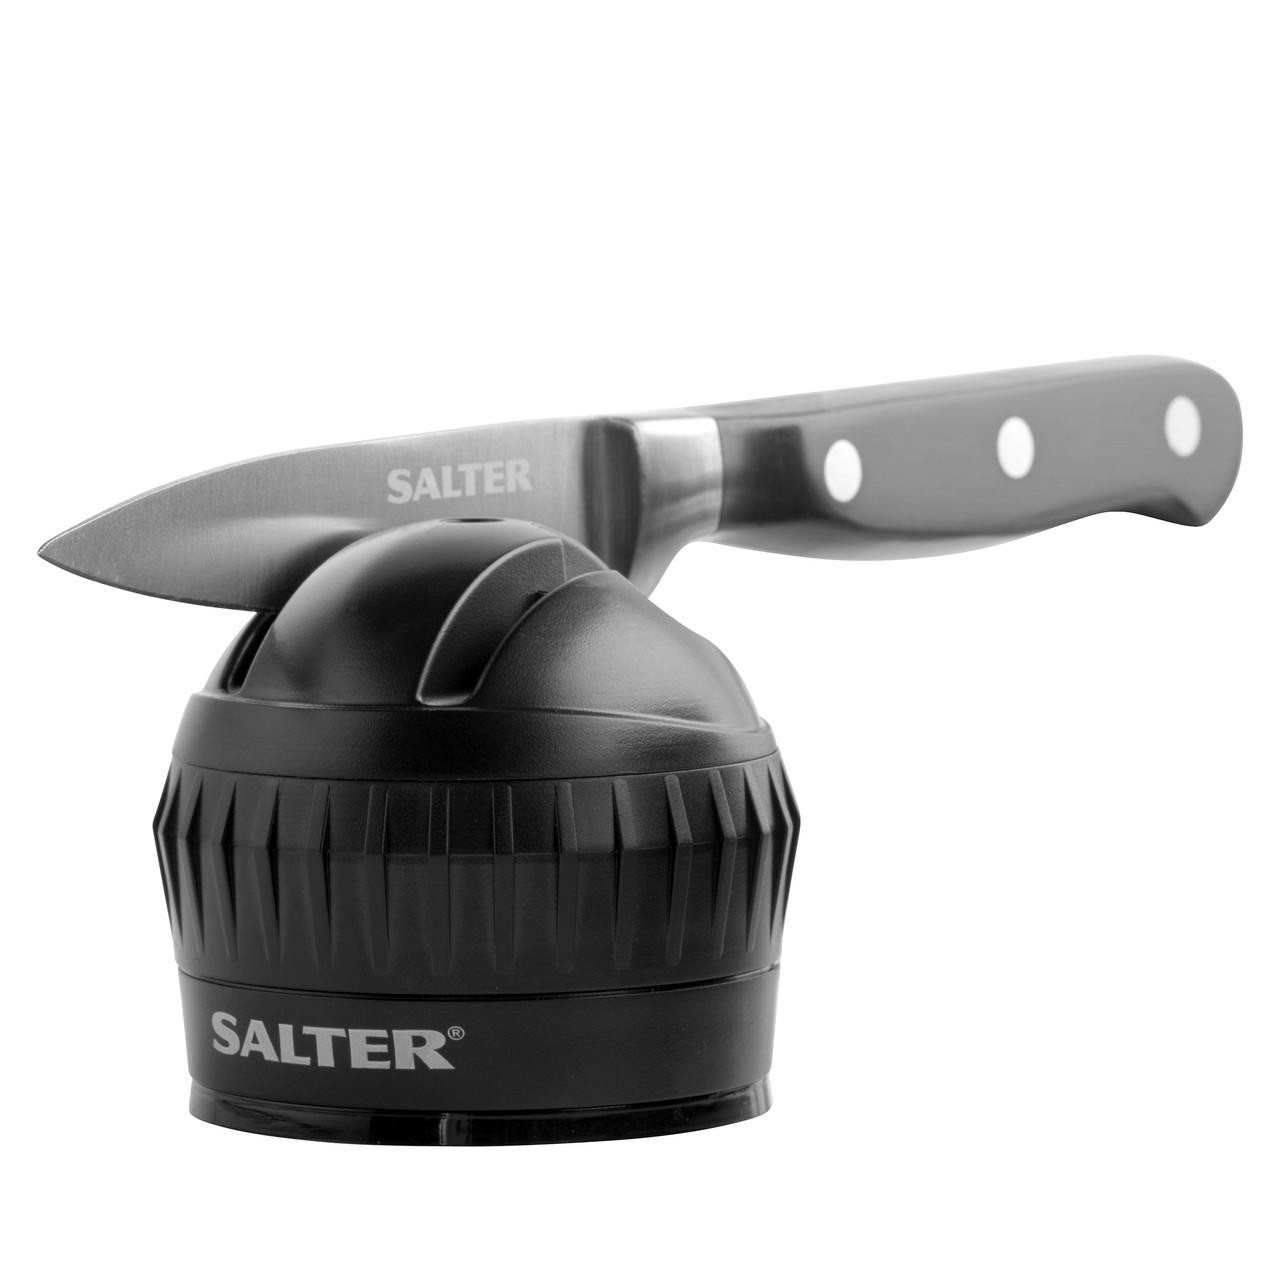 https://cdn11.bigcommerce.com/s-5vfc75n1yv/images/stencil/1280x1280/products/2546/18237/manual-knife-sharpener-with-secure-suction-cup-salter-bw11671b-5054061438420__15290.1698134037.jpg?c=1